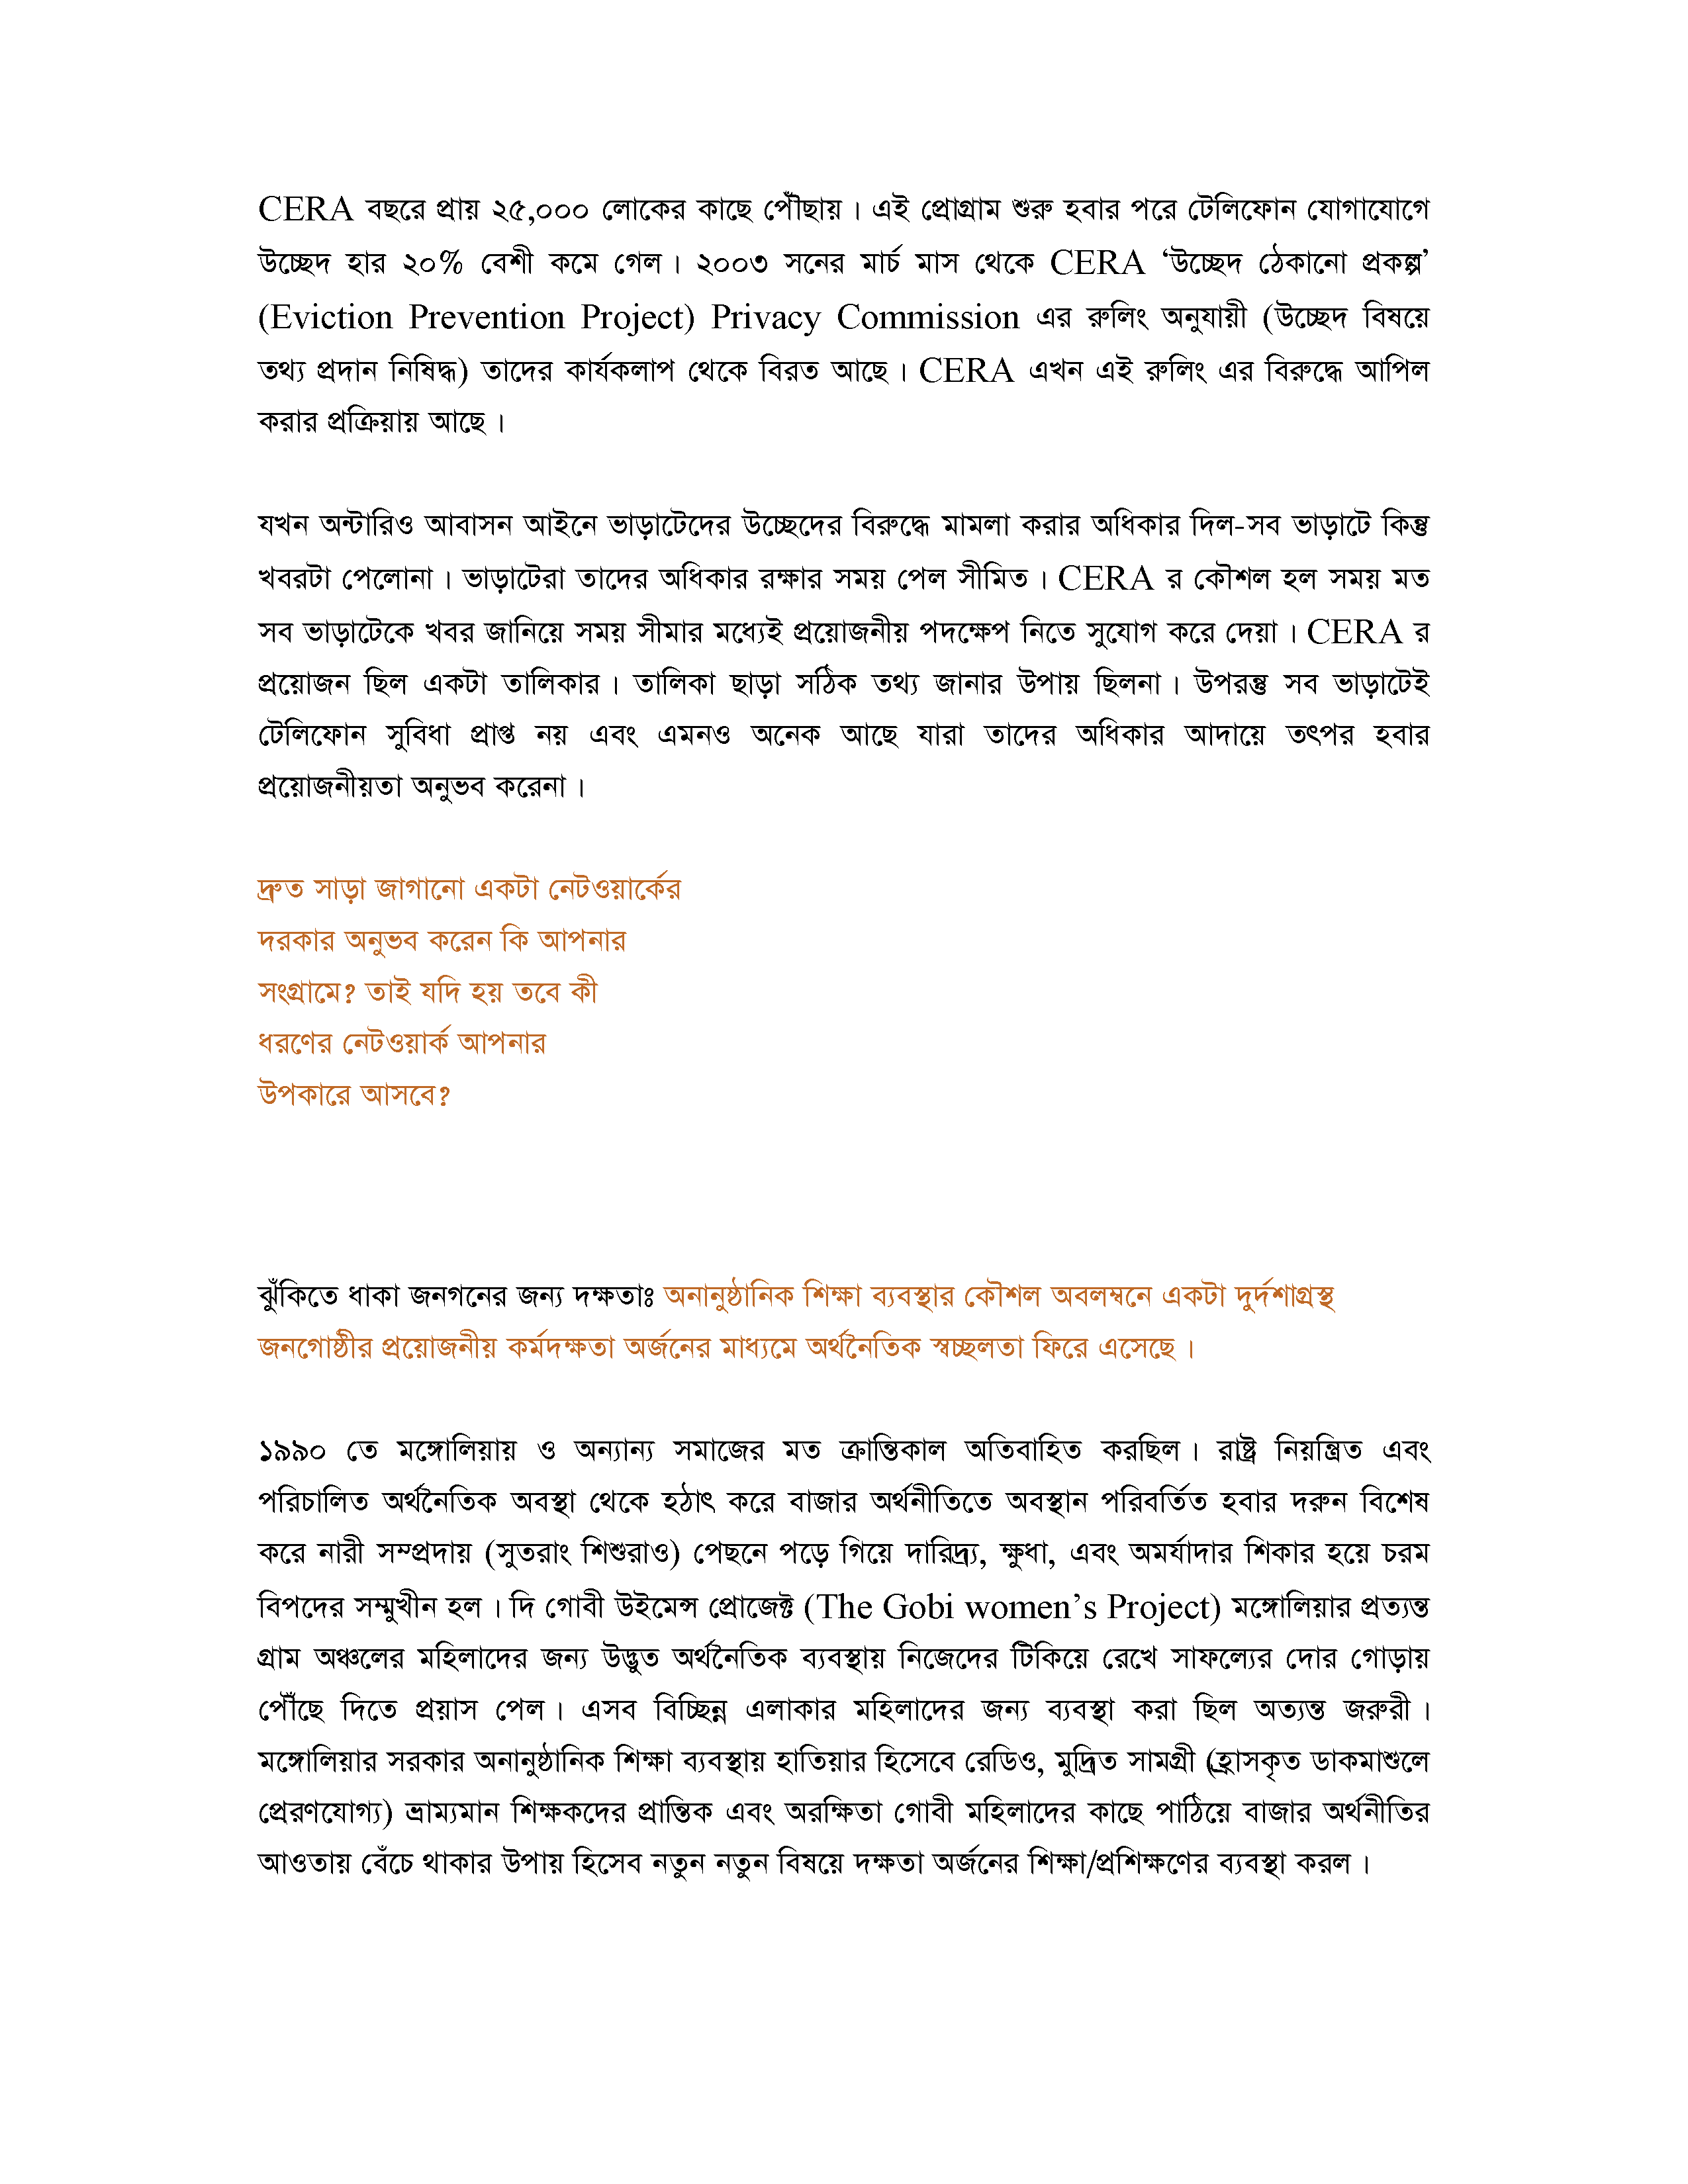 New Tactics in Human Rights: A Resource for Practitioners (Bangla–partial translation)